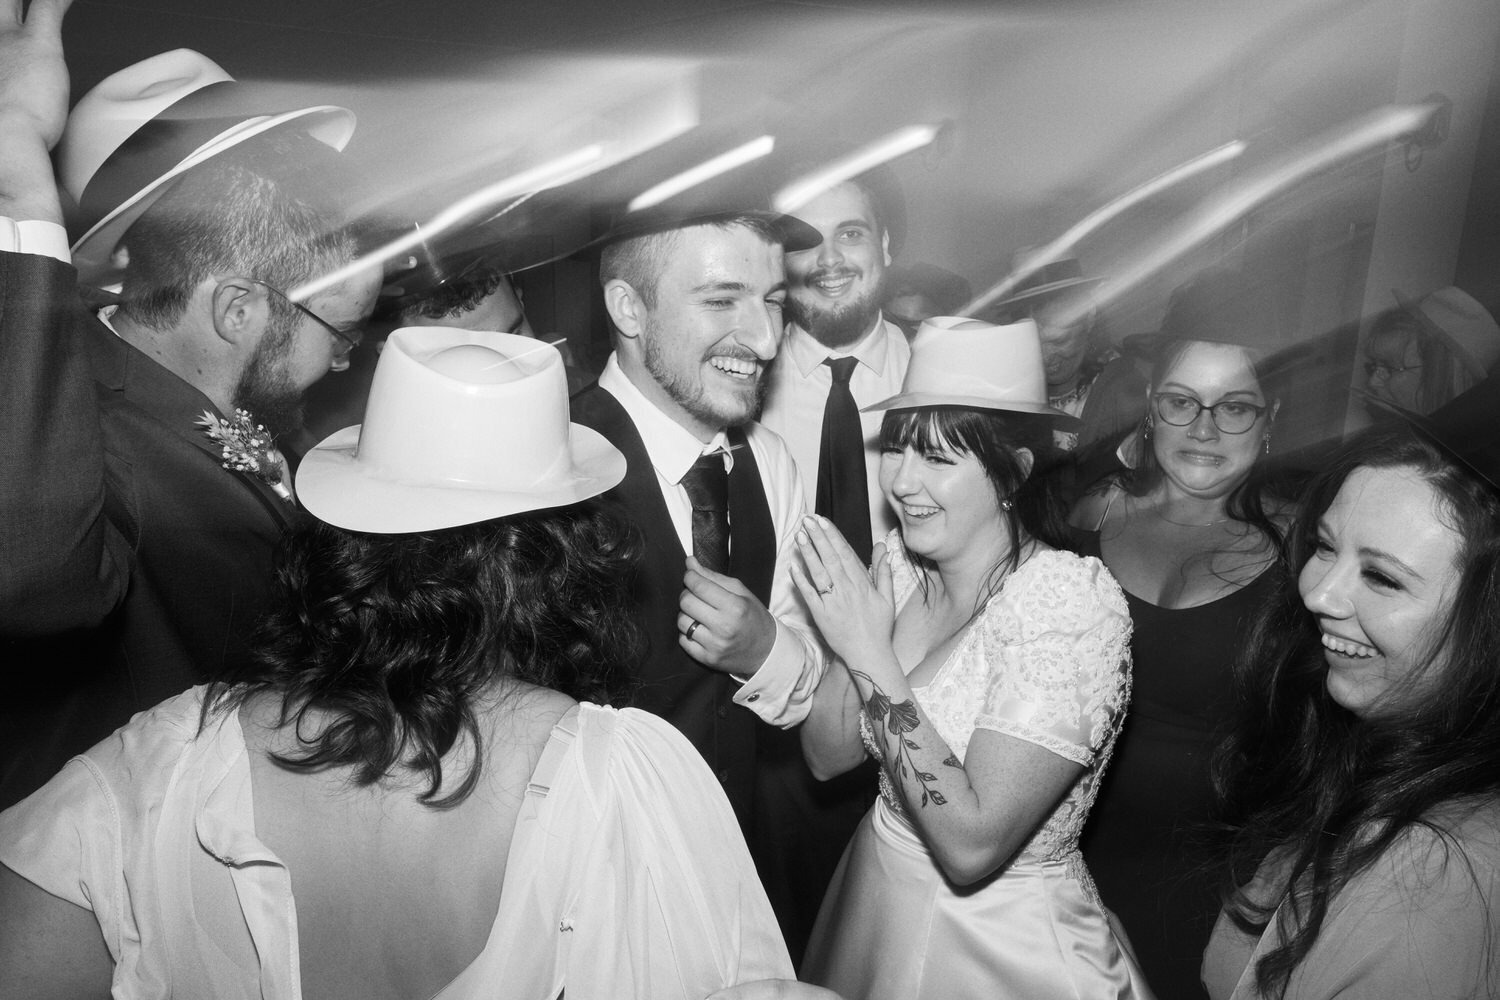 Bride and groom laugh on the dance floor surrounded by wedding guests